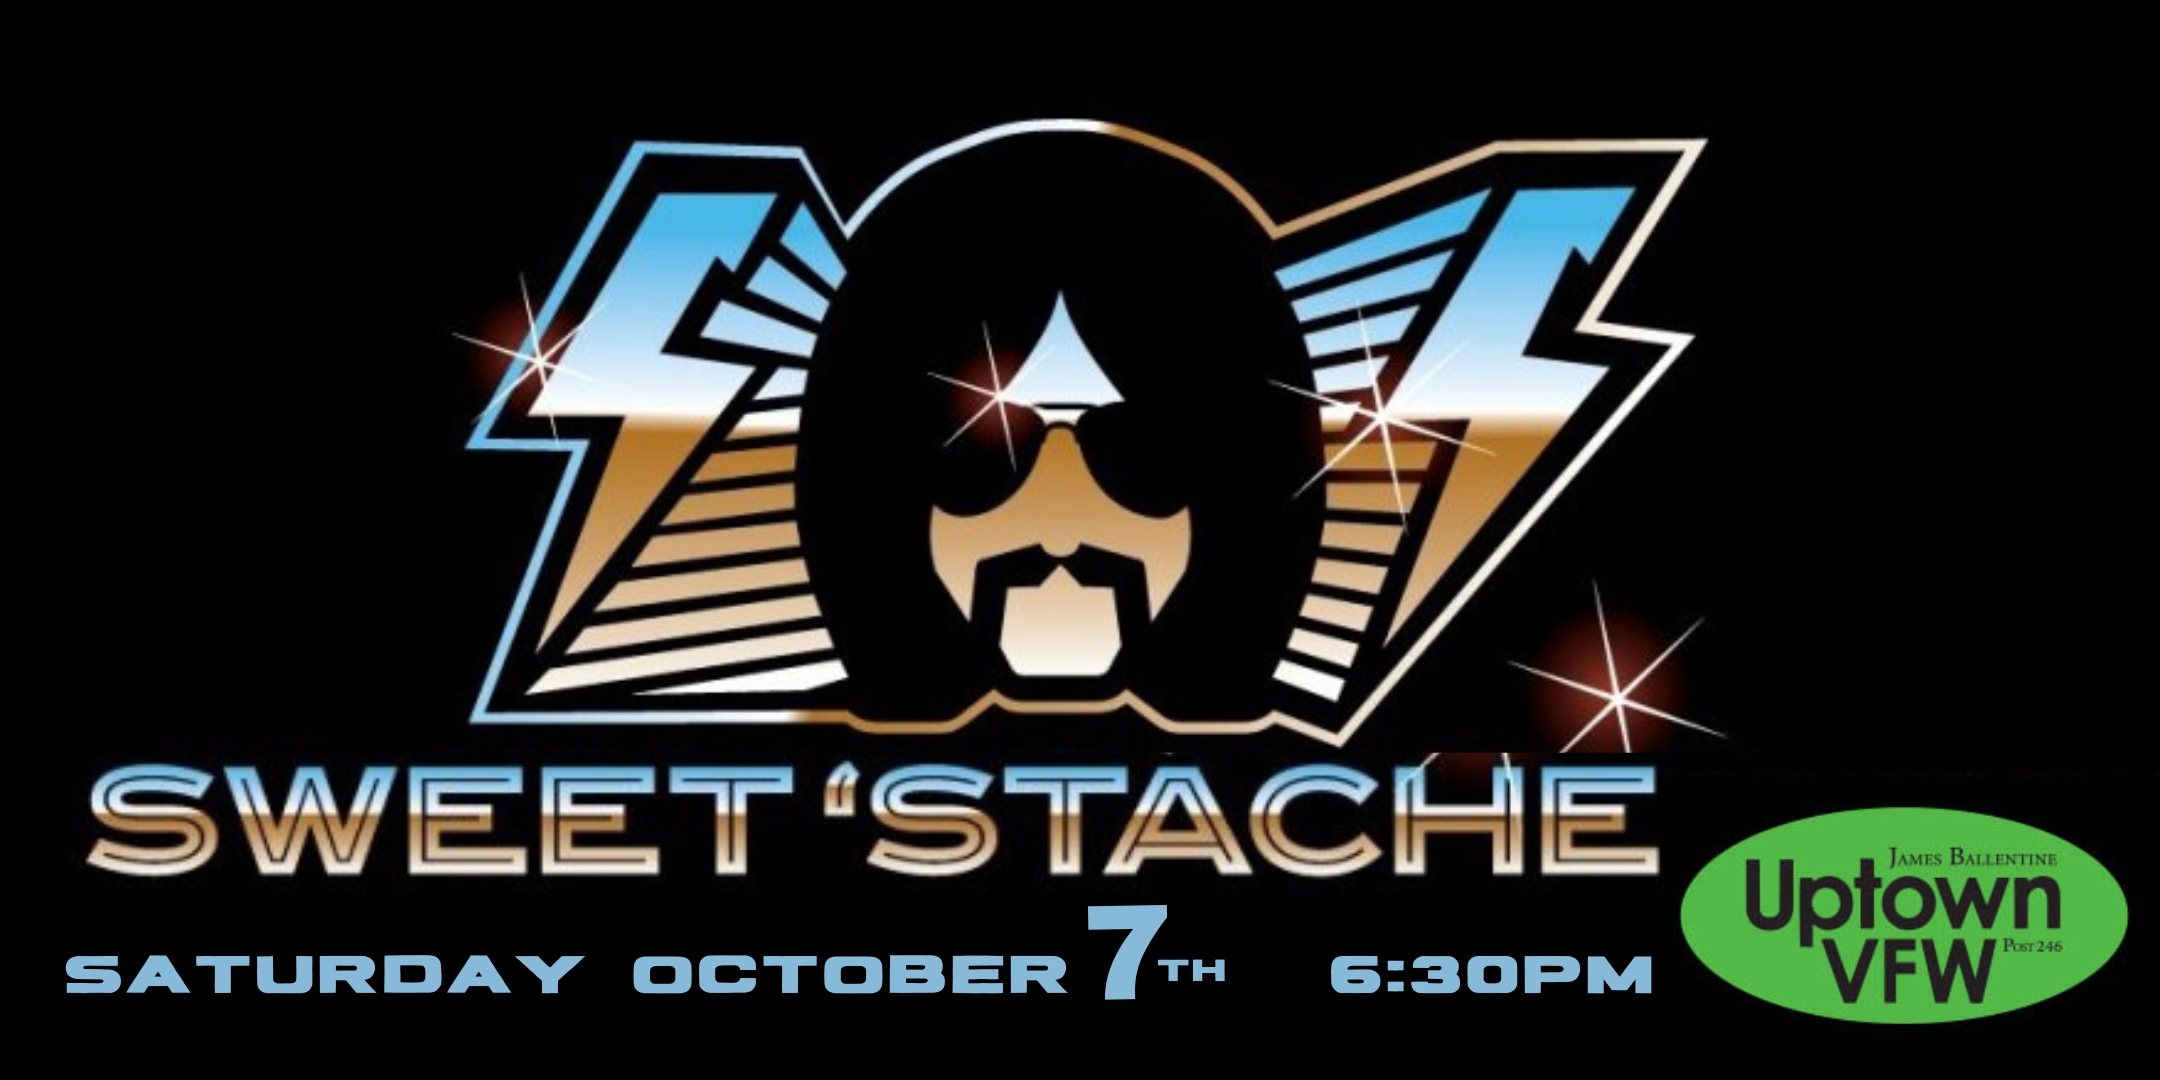 An Evening with.. Sweet Stache Saturday, October 7 James Ballentine "Uptown" VFW Post 246 Doors 6:30pm :: Music 7:00pm :: 21+ $10 ADV / $15 DOS